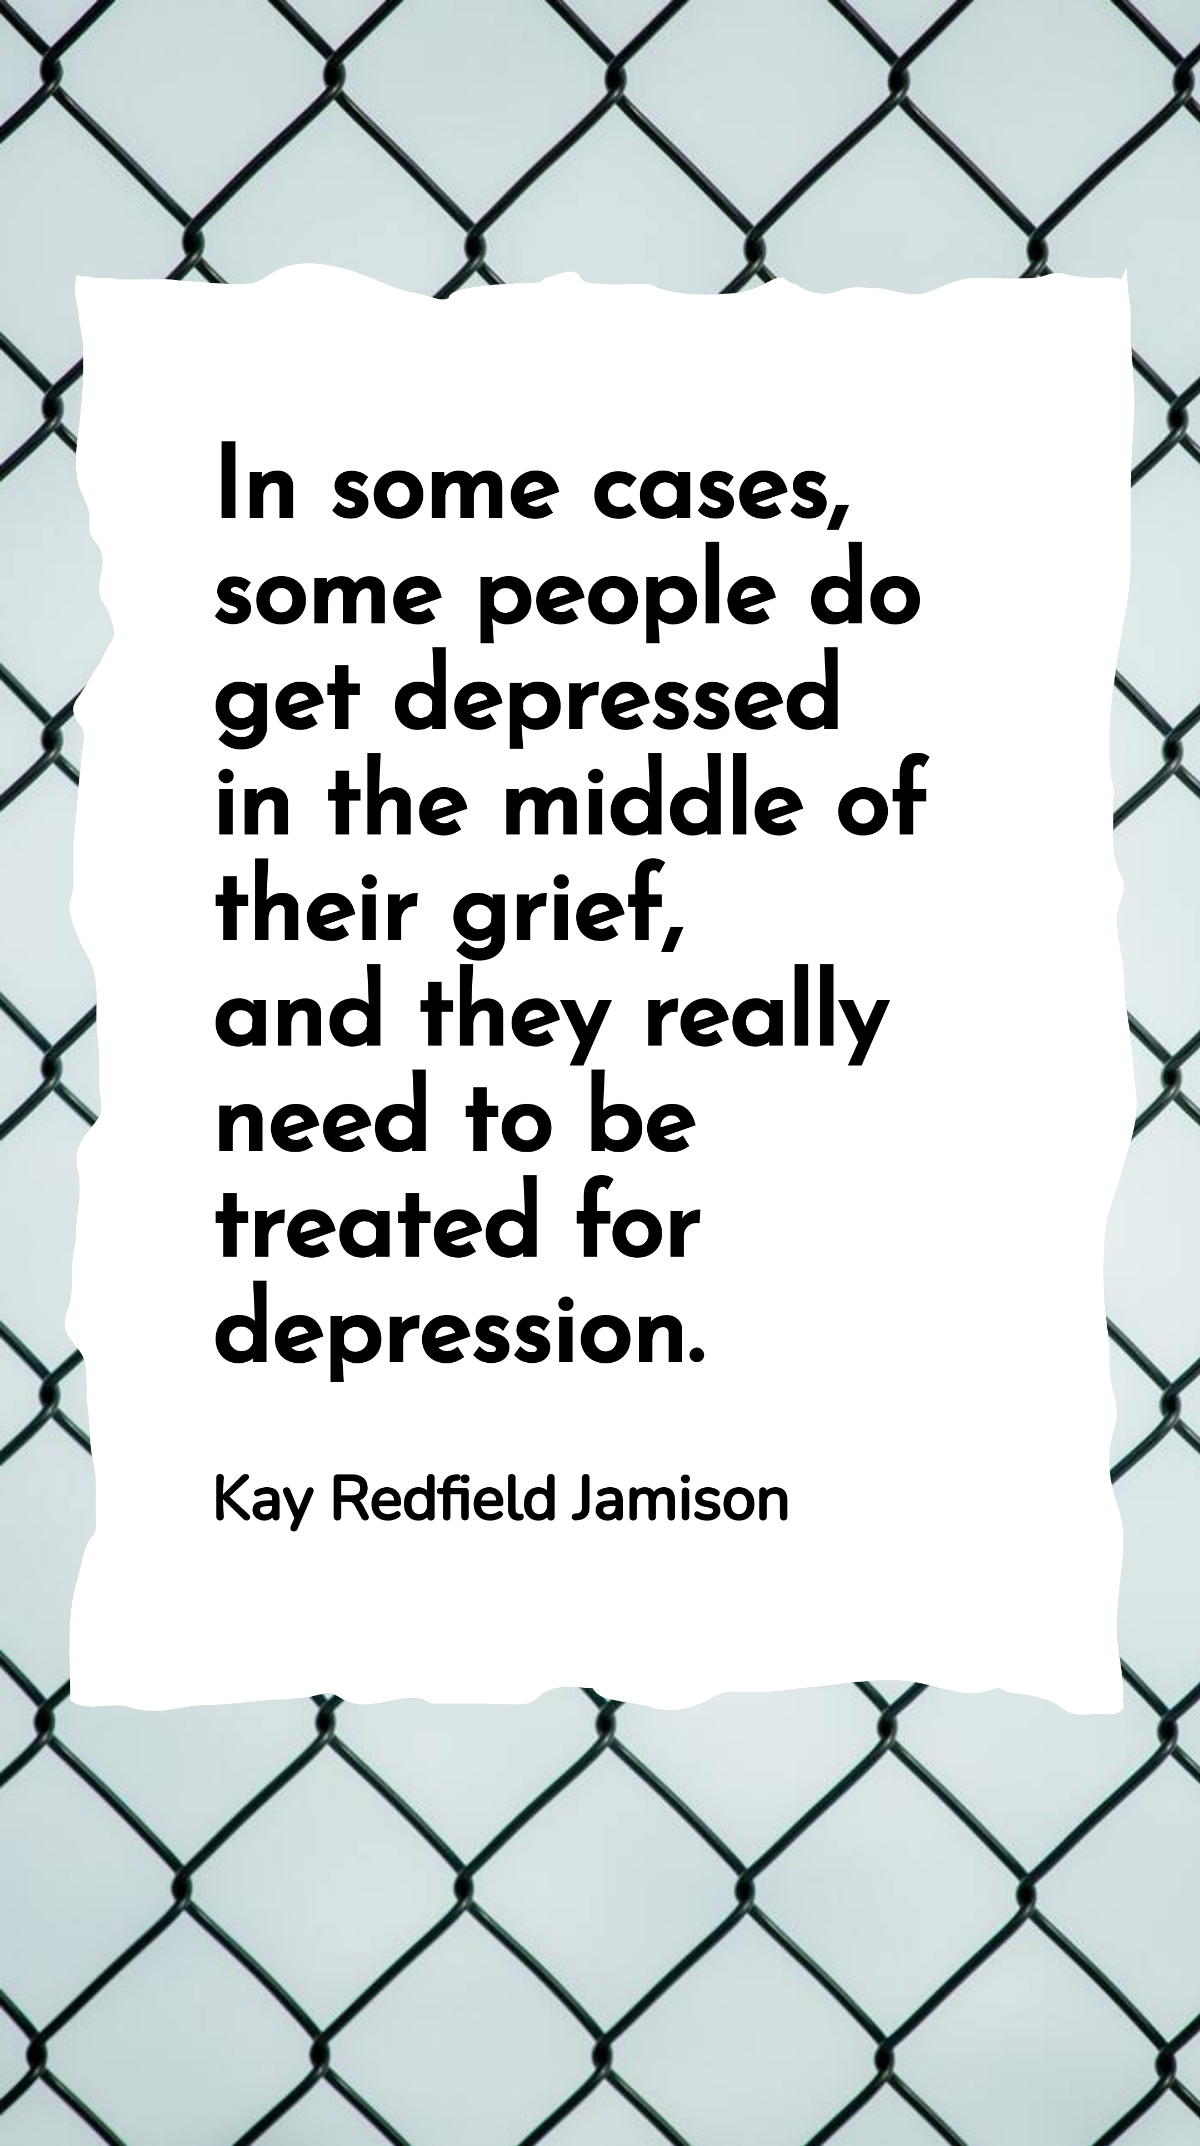 Kay Redfield Jamison - In some cases, some people do get depressed in the middle of their grief, and they really need to be treated for depression. Template